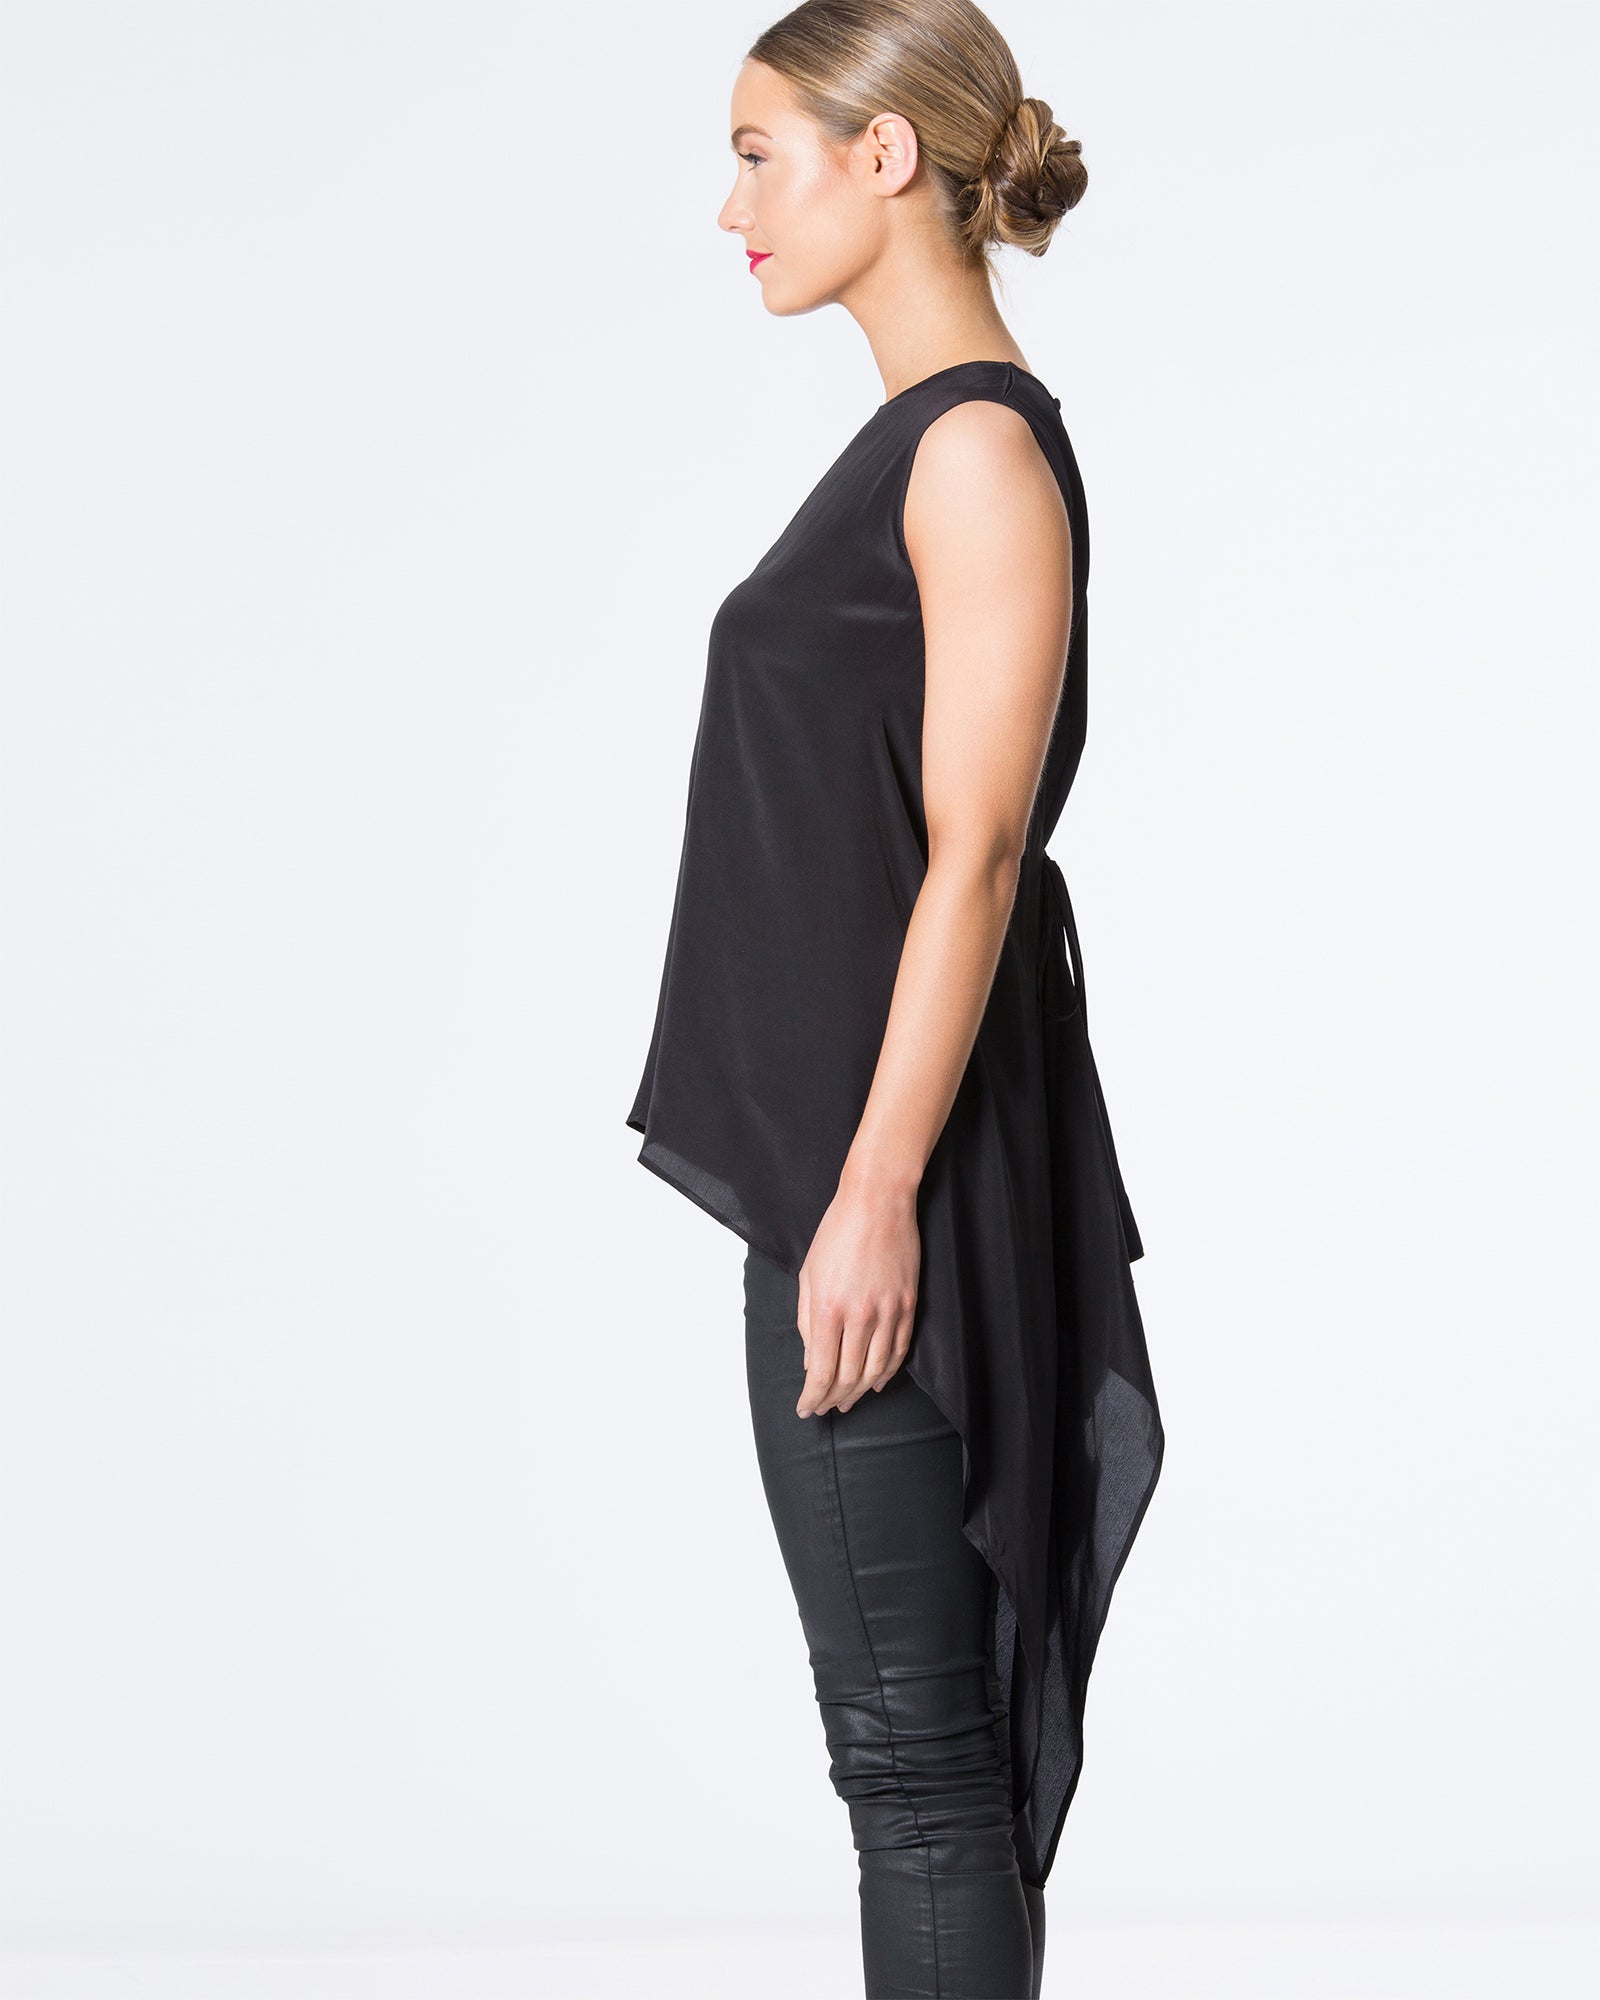 Silk Batwing Top with Draping Sides and Keyhole Back